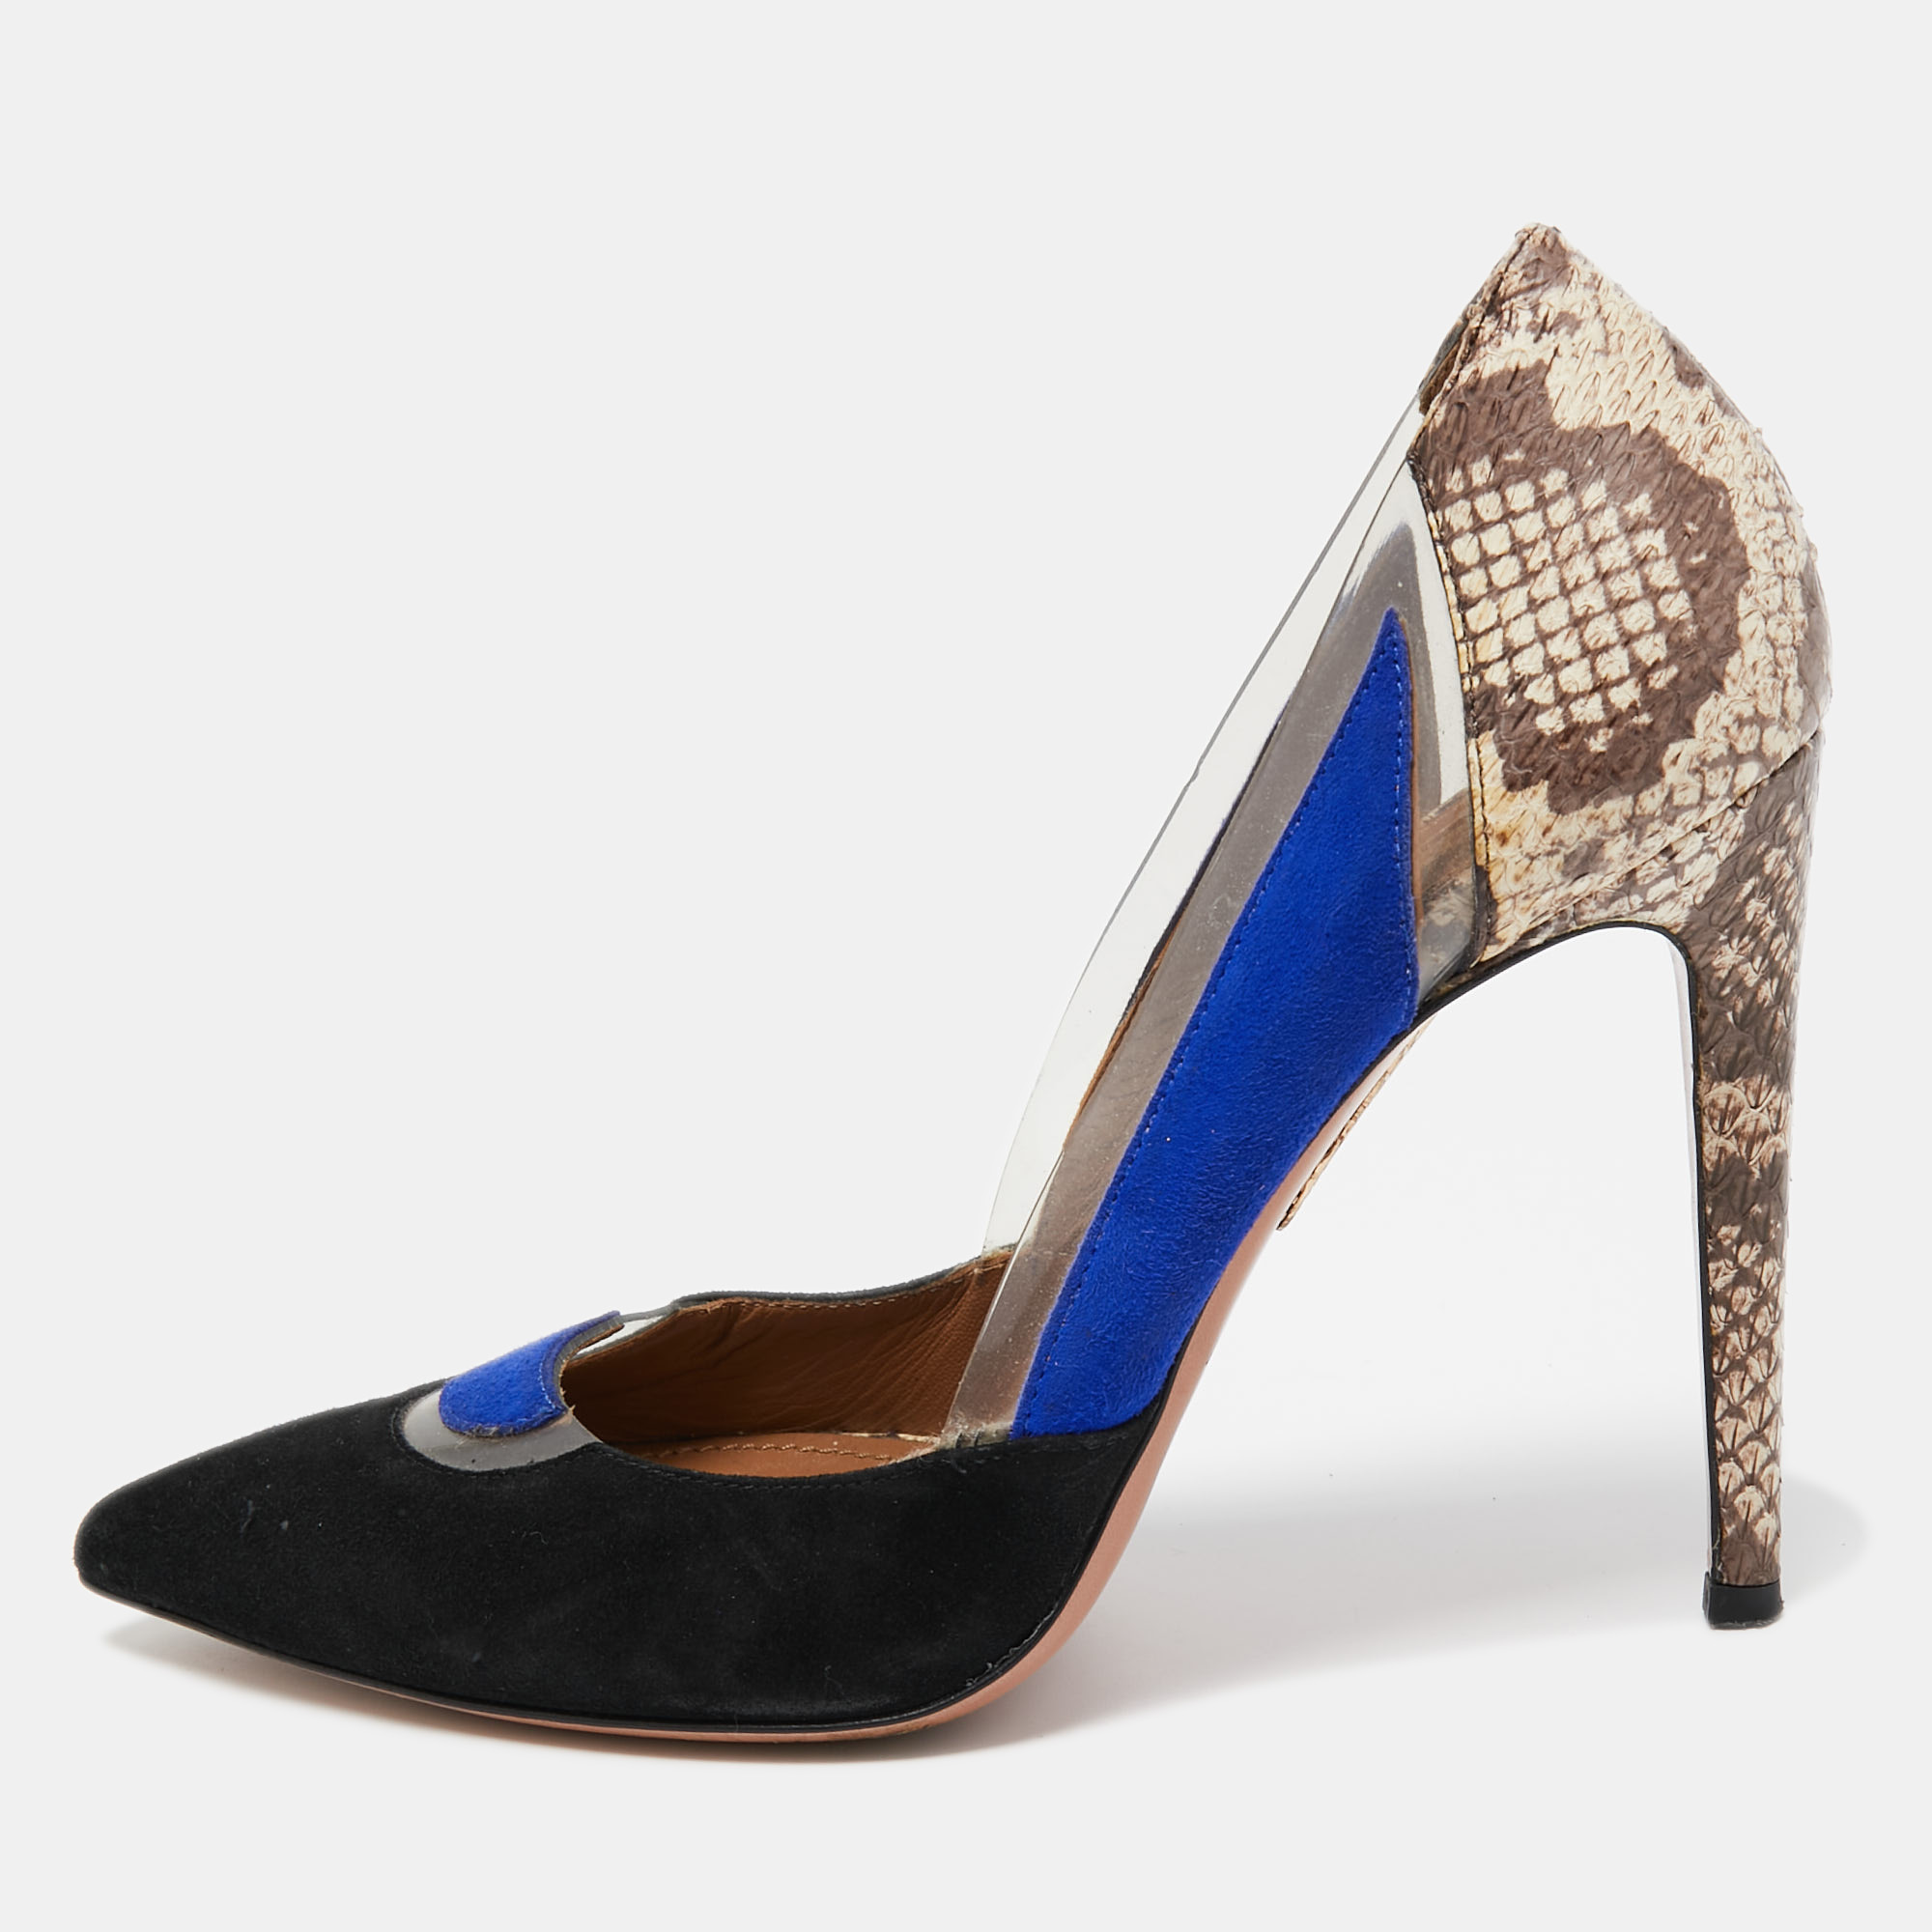 Exuding femininity and elegance these pumps feature a chic silhouette with an attractive design. You can wear these pumps for a stylish look.